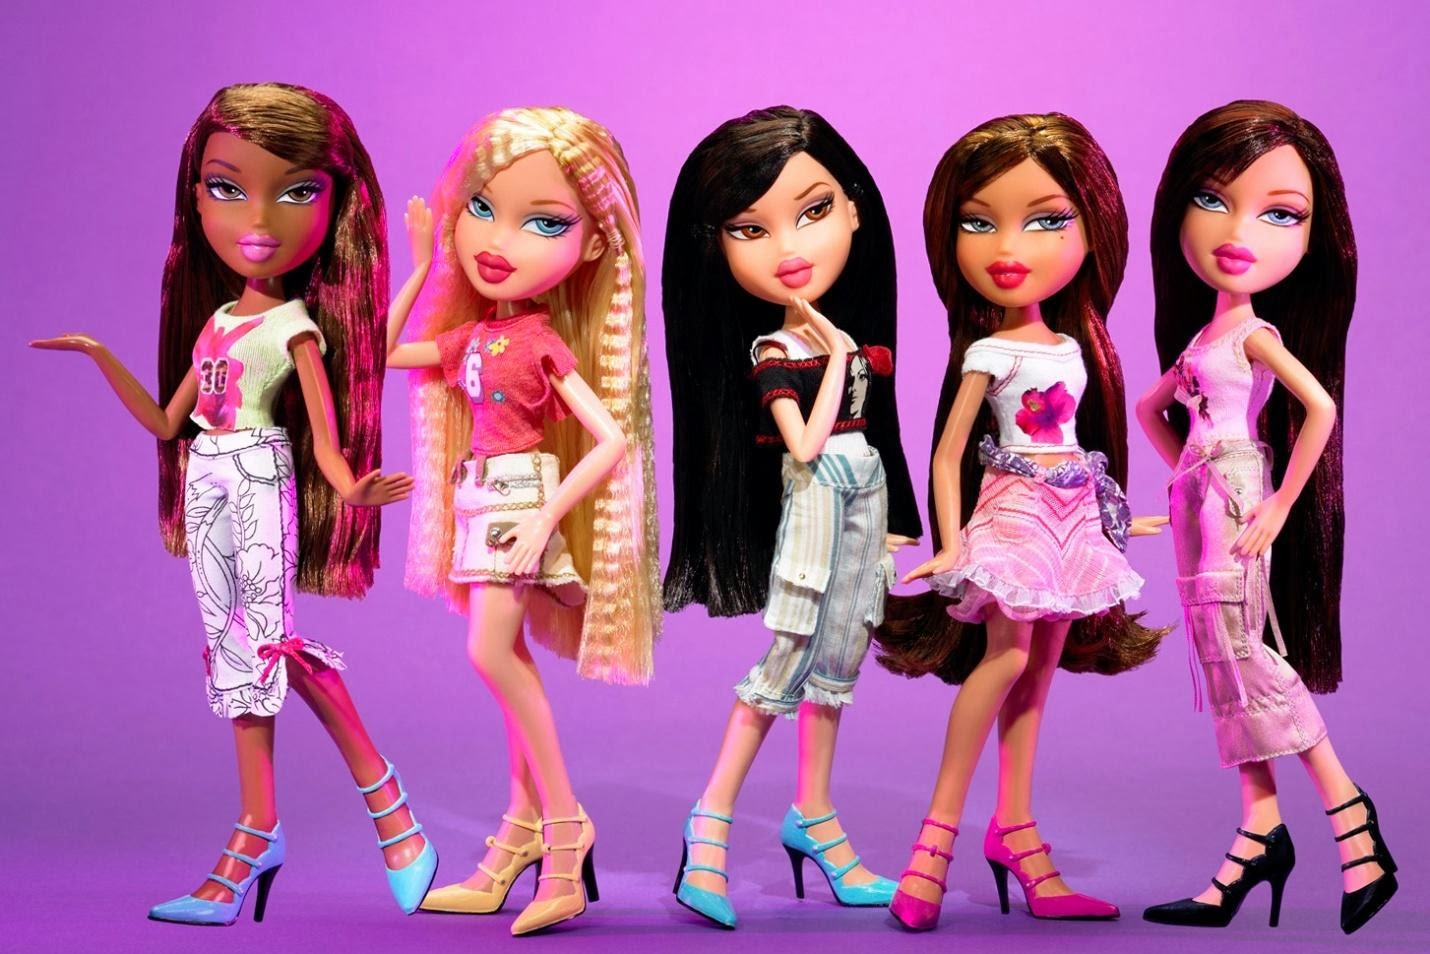 Give A Young Girl The Christmas Gift Of Their Dreams With A Bratz Doll ...